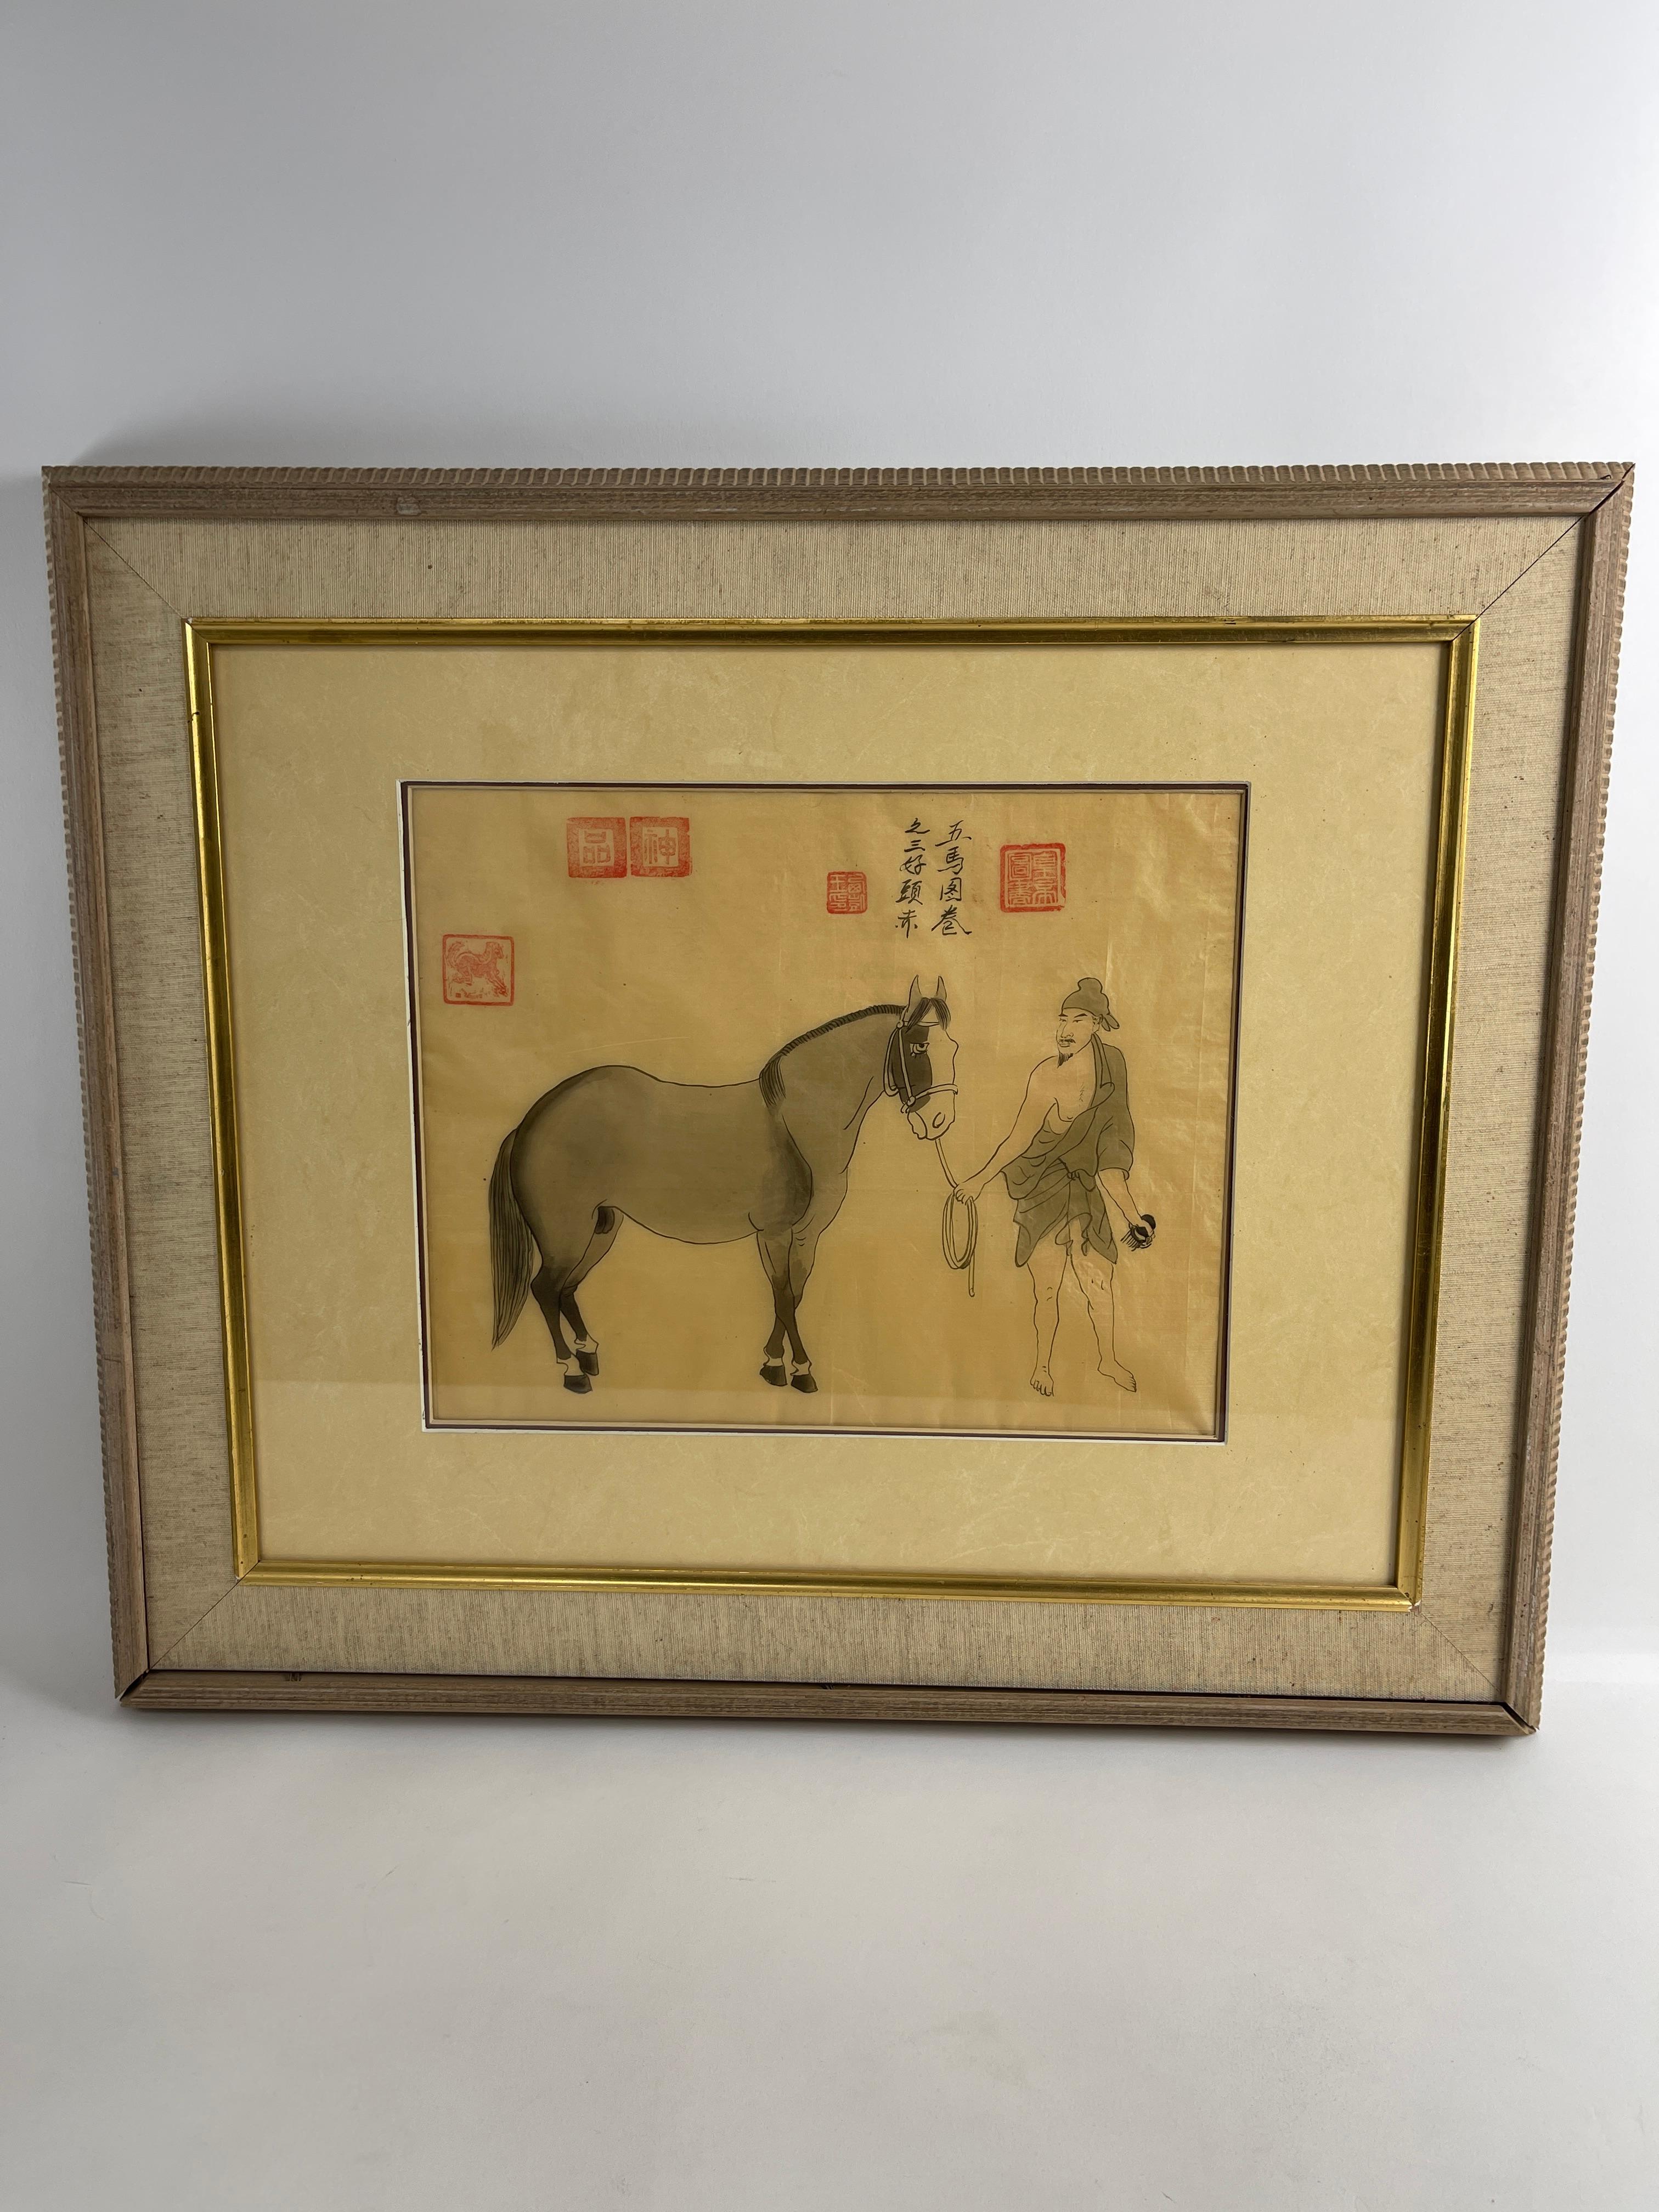 ANTIQUE CHINESE WATERCOLOR PAINTING ART FRAMED IMPORTANT